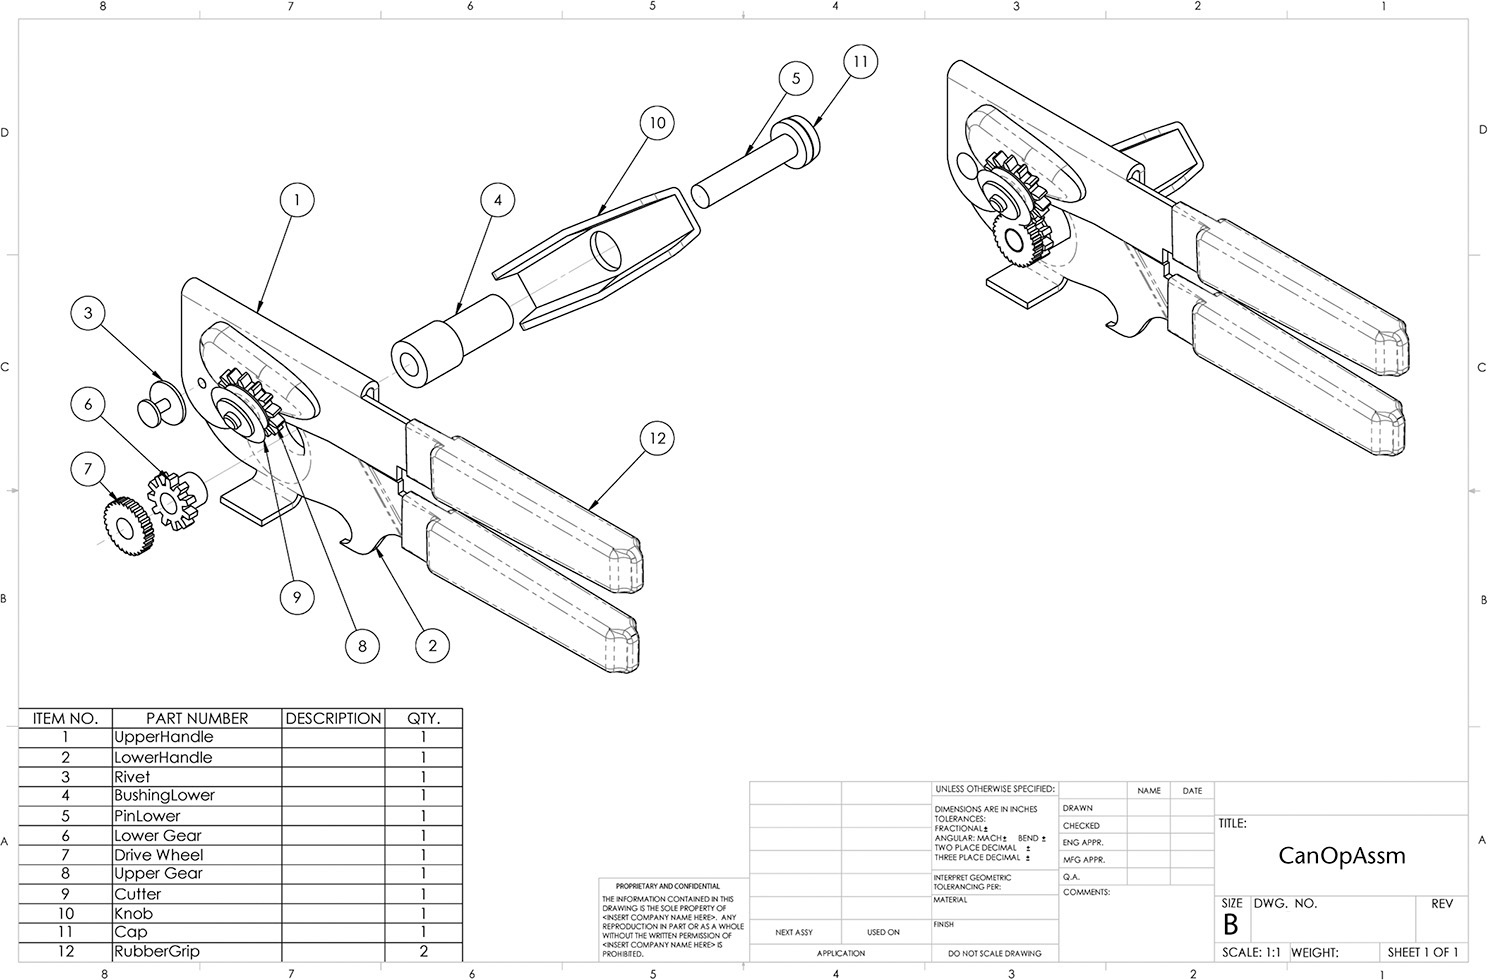 Figure depicts the assembly drawing of a new pistol-grip design.